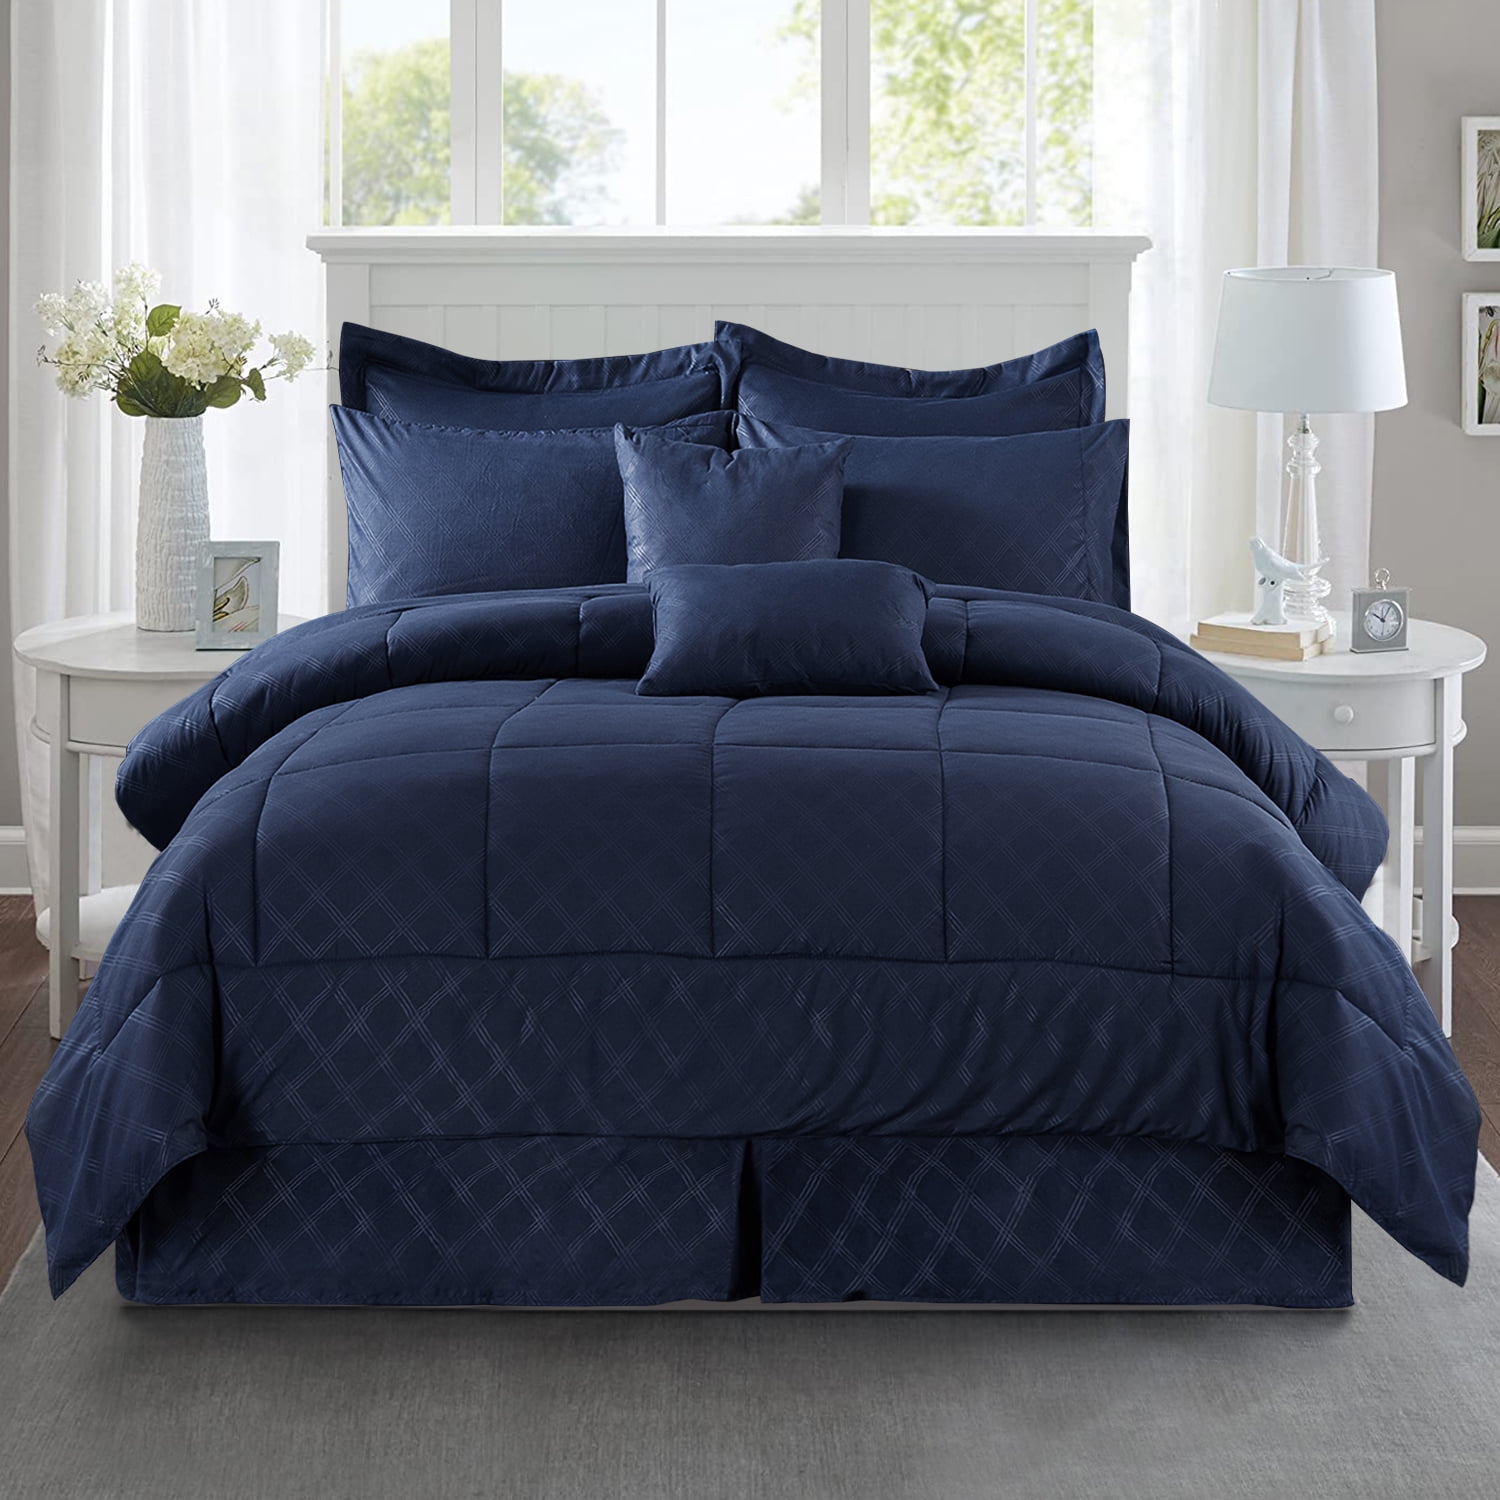 Navy Blue White Red Damask 10pc Comforter Sheet Set Twin Full Queen King Bed Bag 